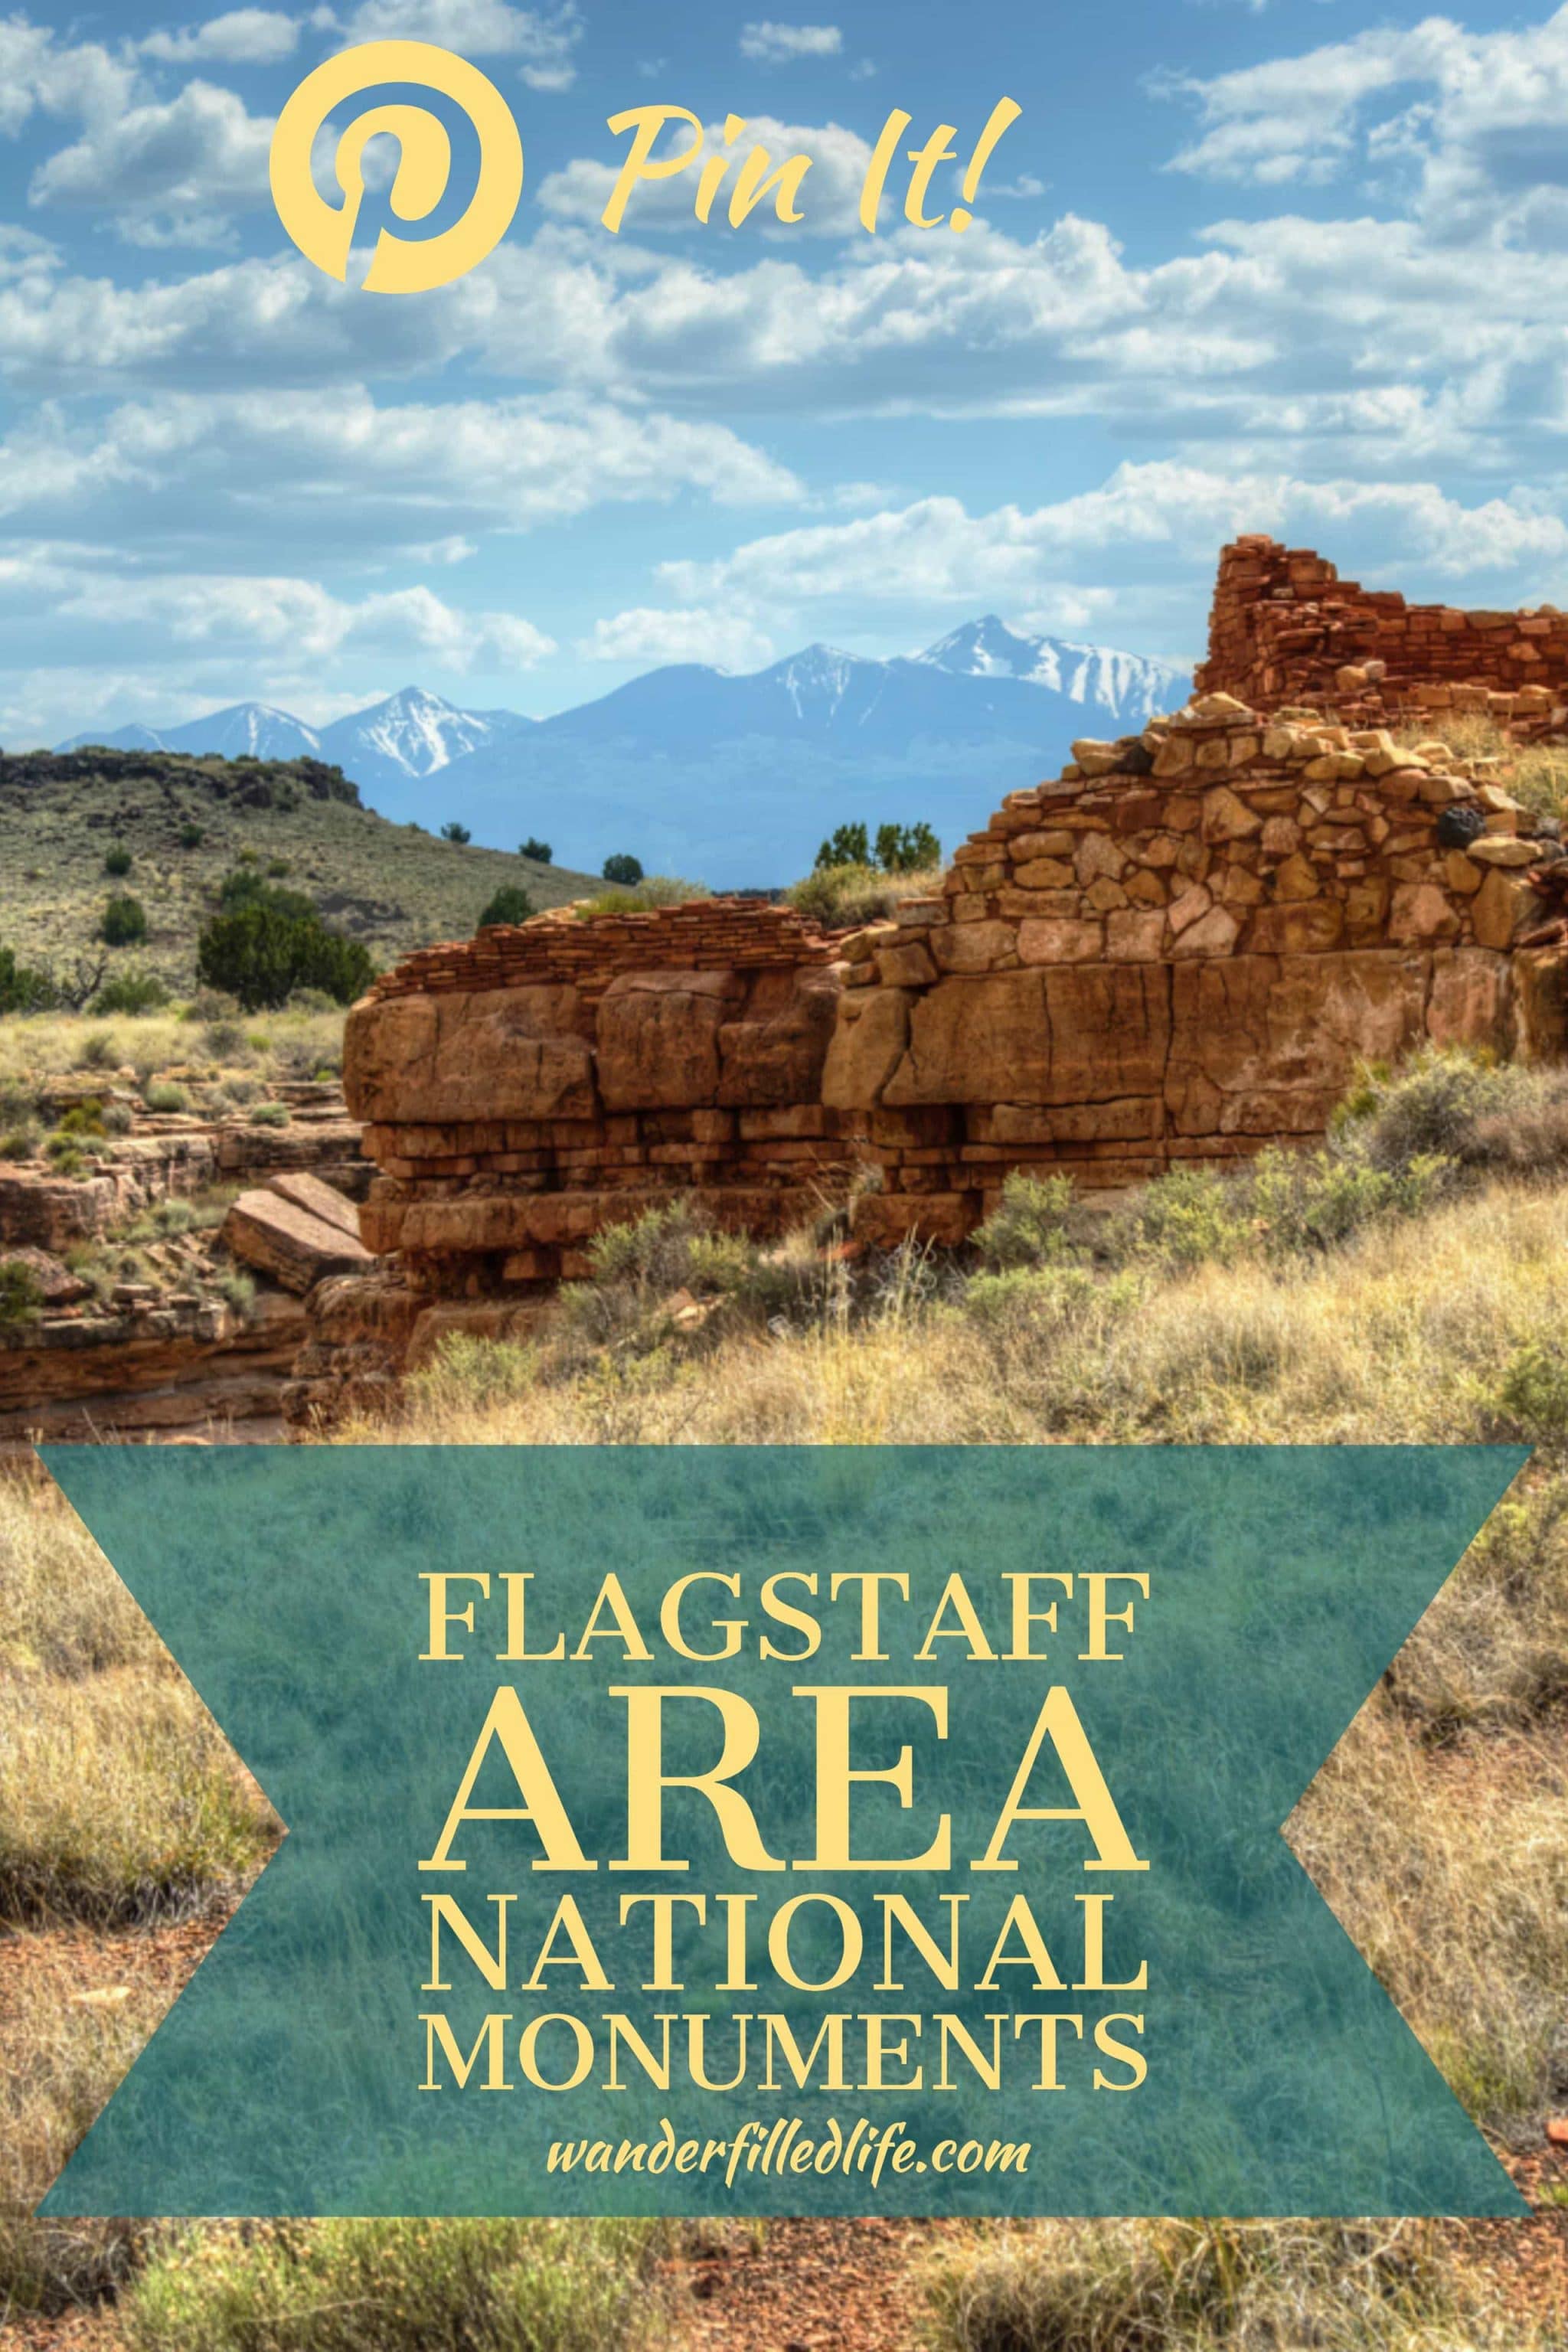 Flagstaff, AZ is home to three very different national monuments: Walnut Canyon, Sunset Crater Volcano and Wupatki, which are easily visited in a day.